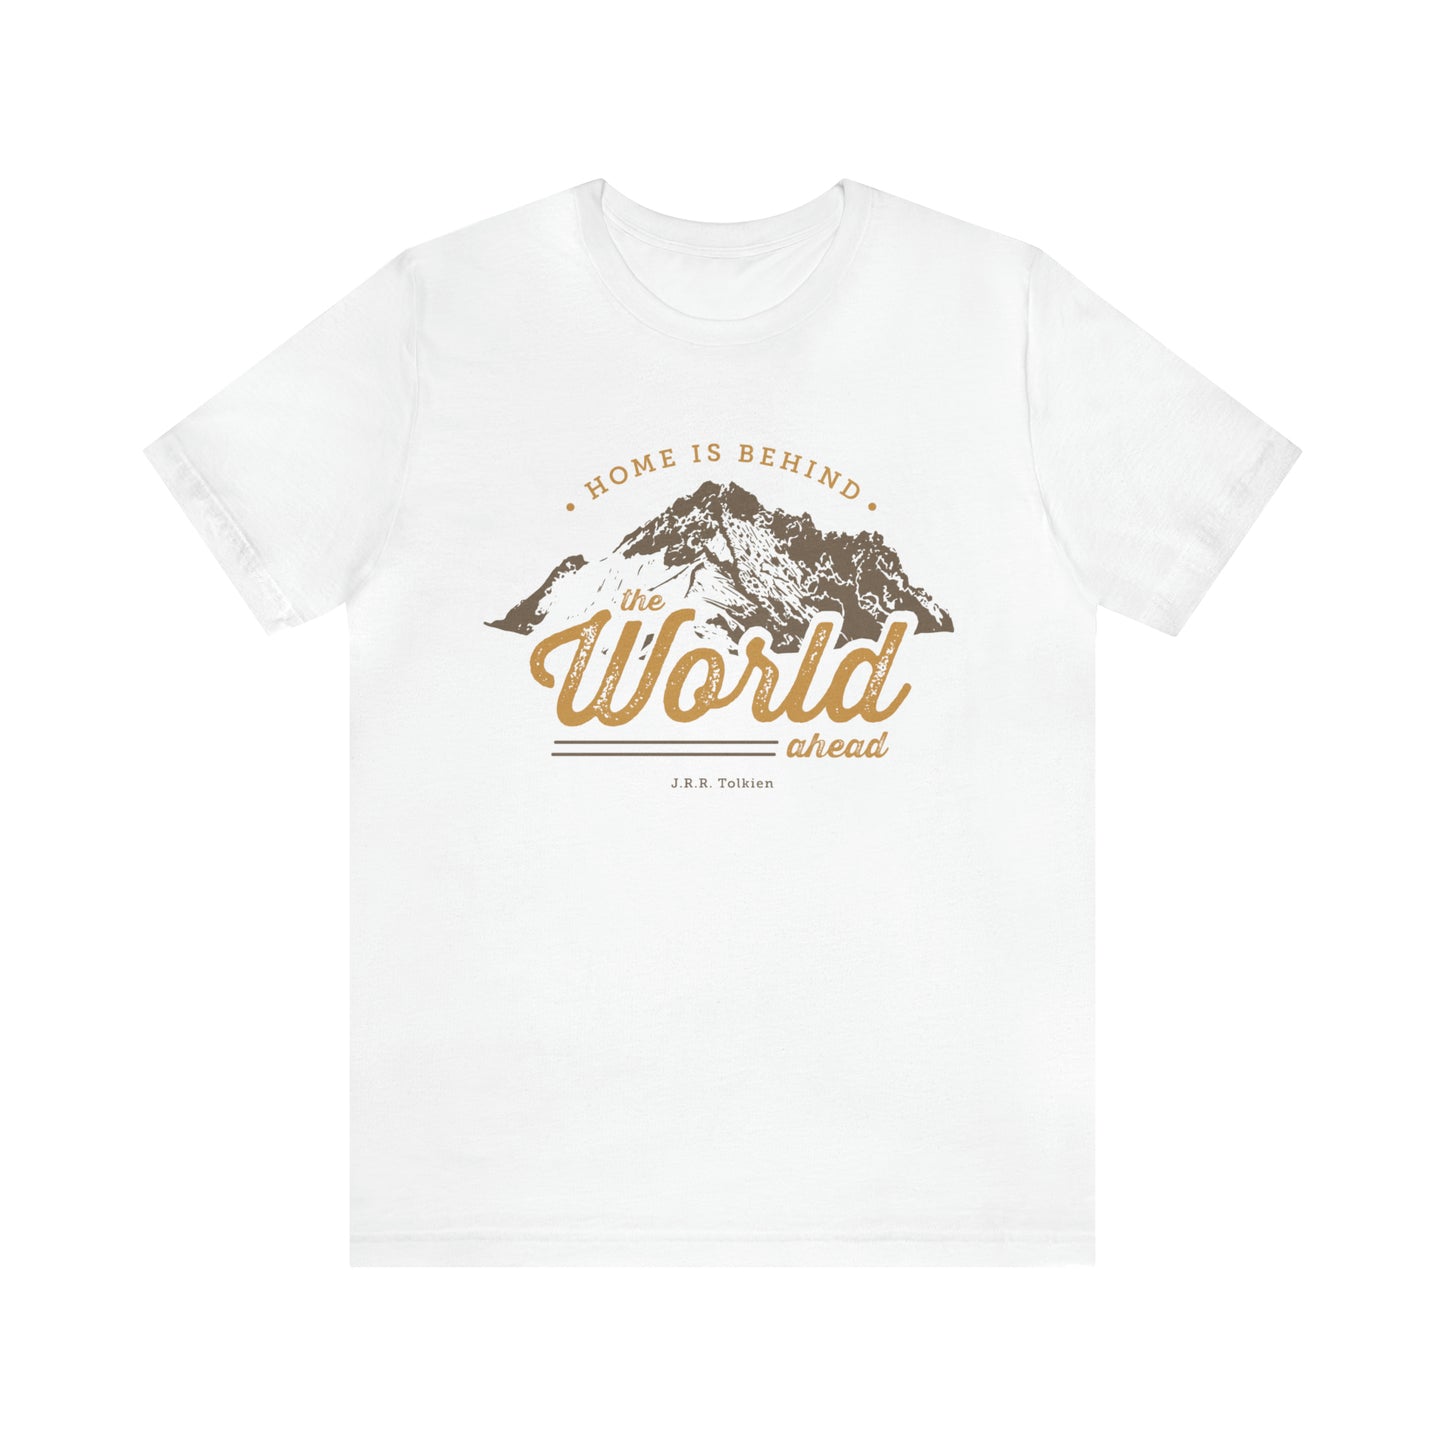 Home is behind the world ahead T-shirt